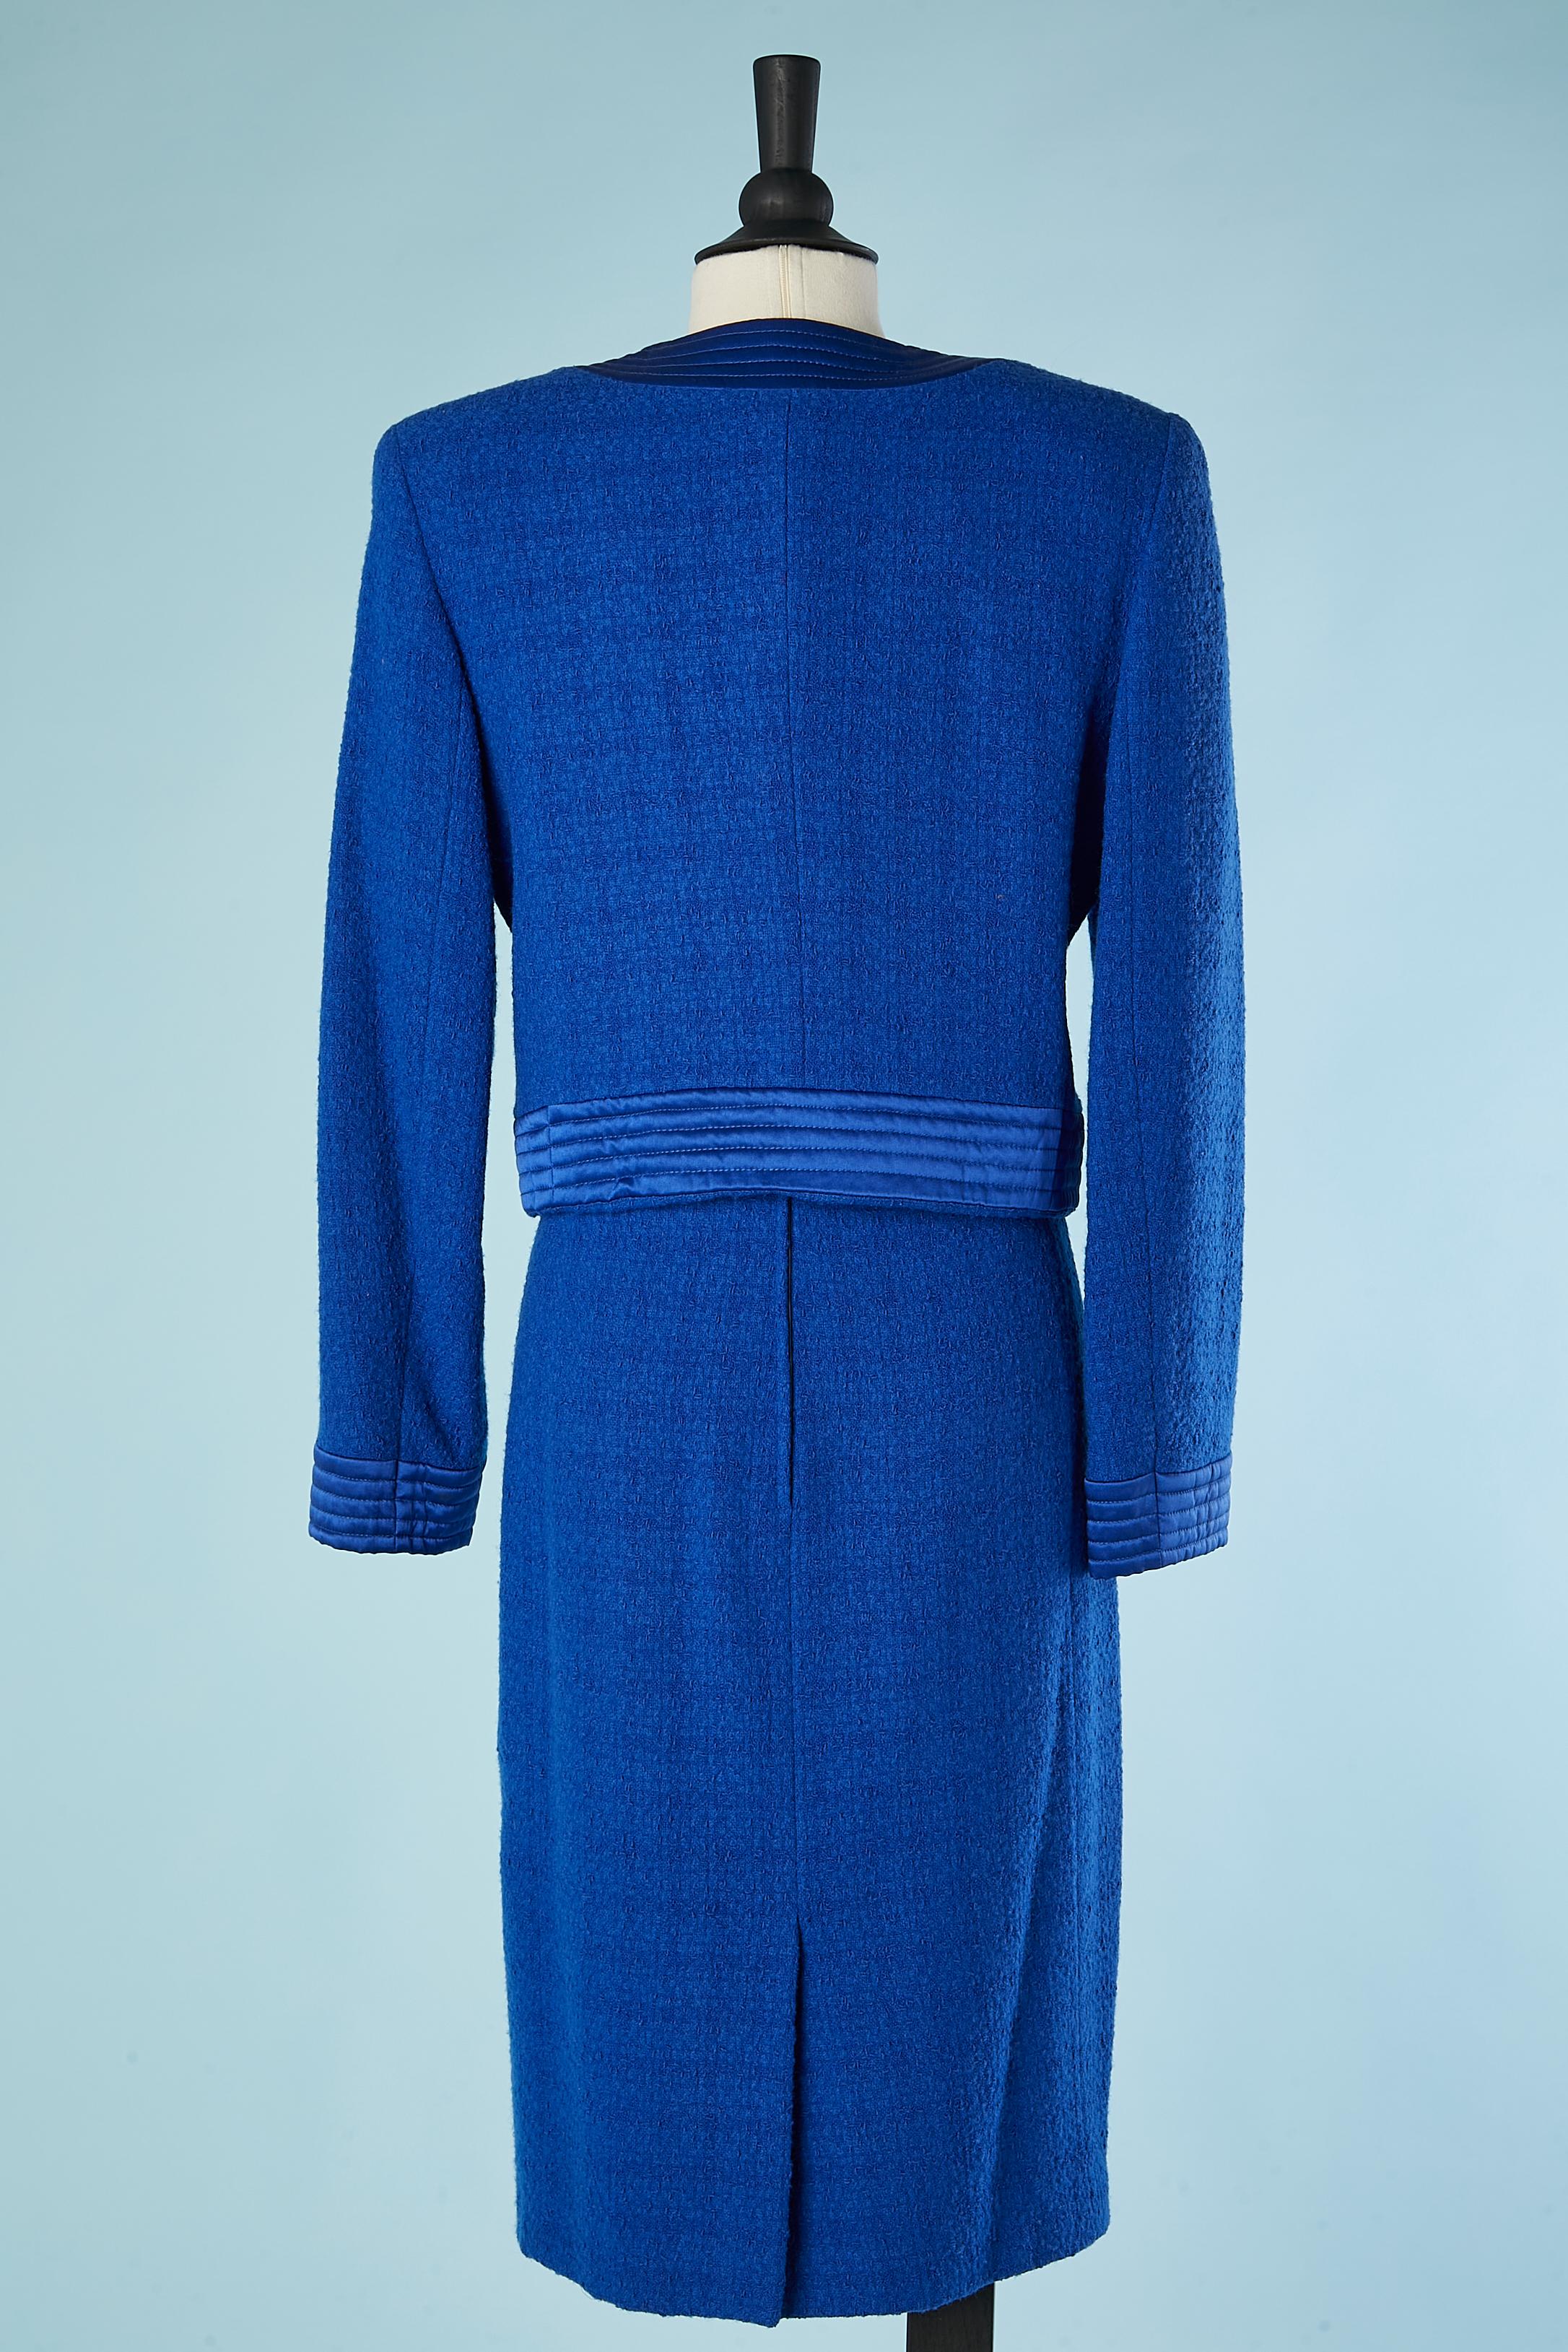 Blue tweed jacket and dress ensemble with satin edge Valentino Miss V  In Excellent Condition For Sale In Saint-Ouen-Sur-Seine, FR